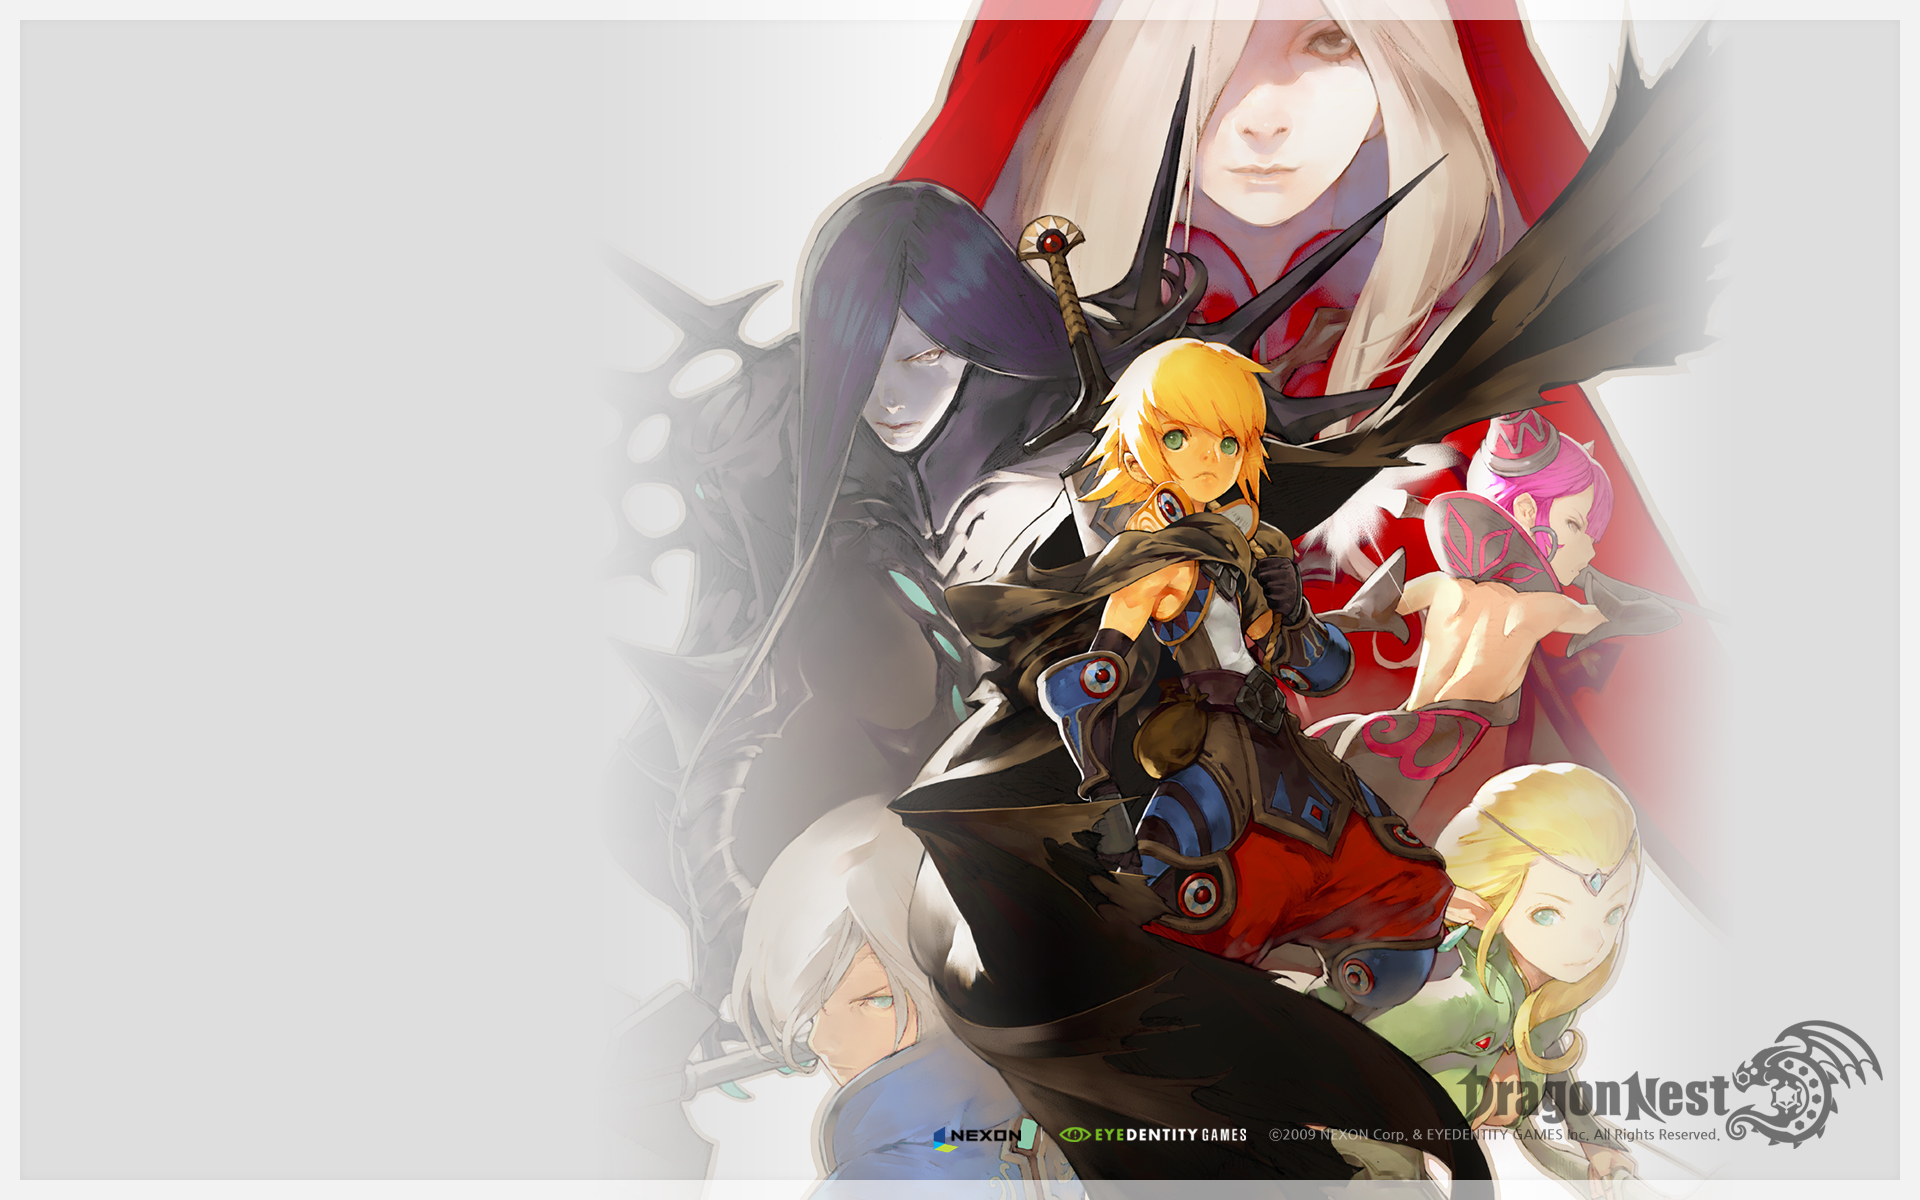 Dragon Nest Wallpaper HD Pictures In High Definition Or